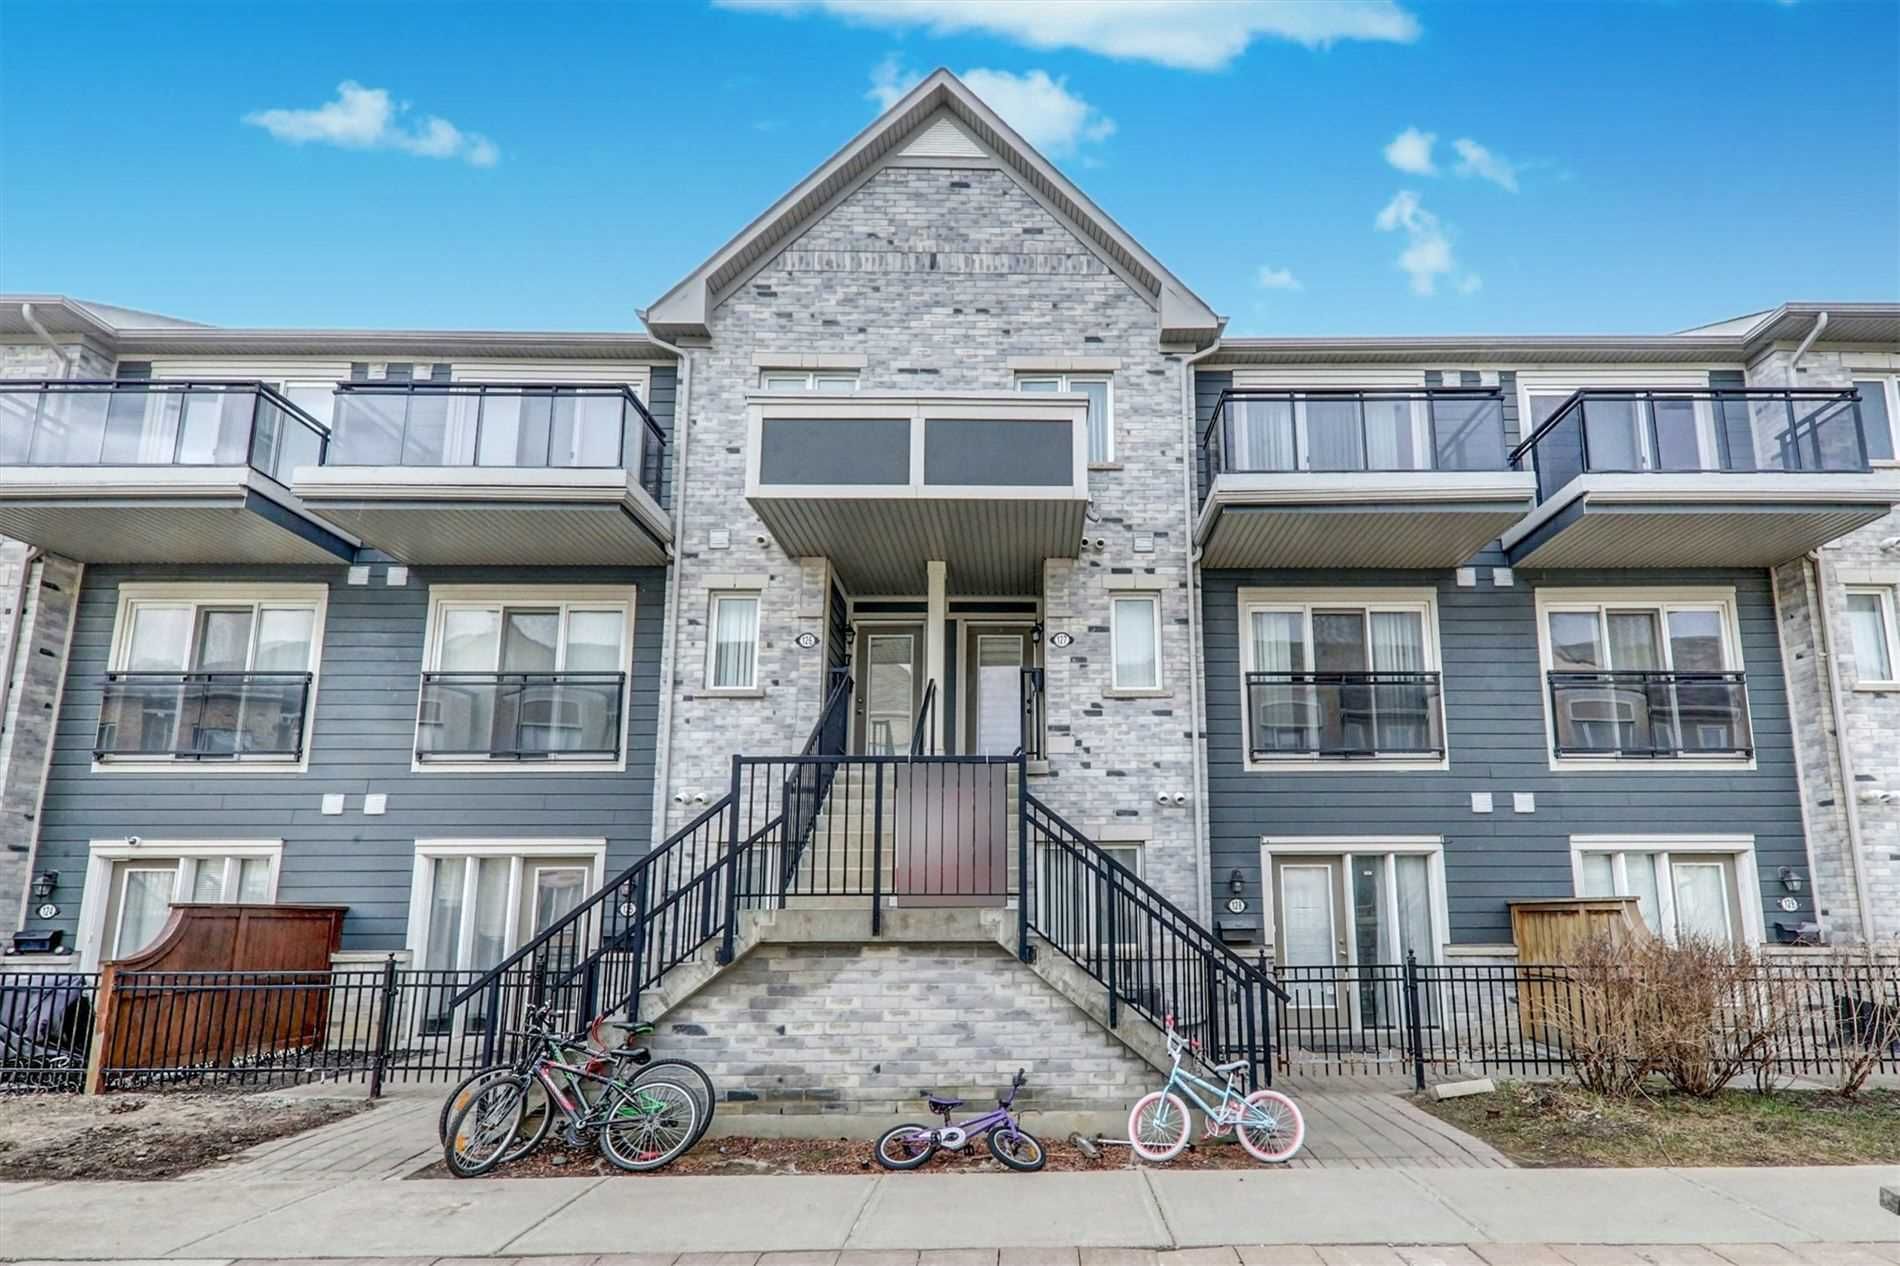 60 Fairwood Circ. This condo townhouse at 60 Fairwood Circle Townhomes is located in  Brampton, Toronto - image #1 of 2 by Strata.ca